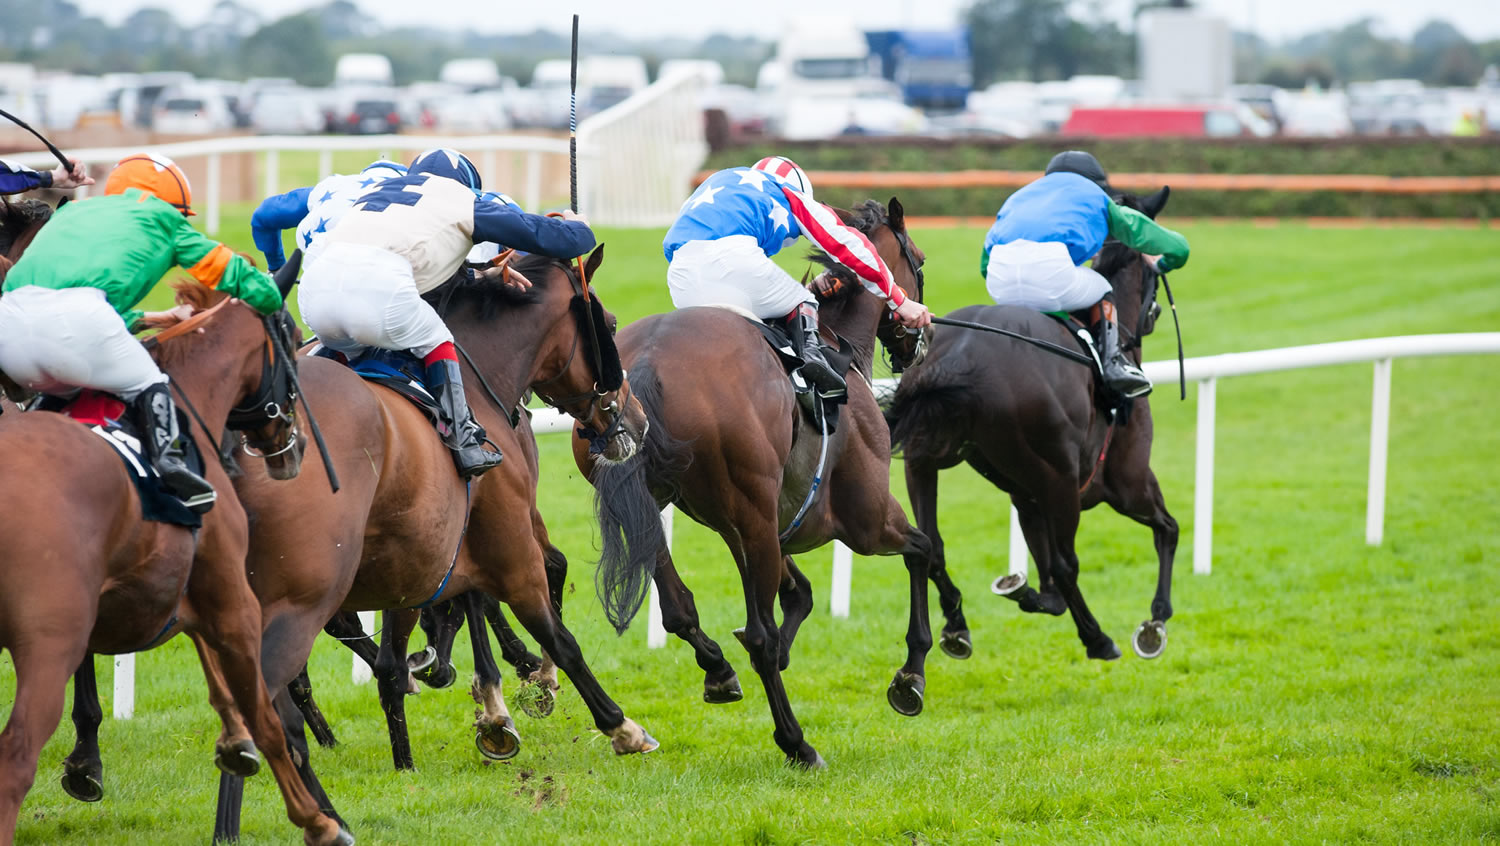 Horse Racing - UK Sporting events